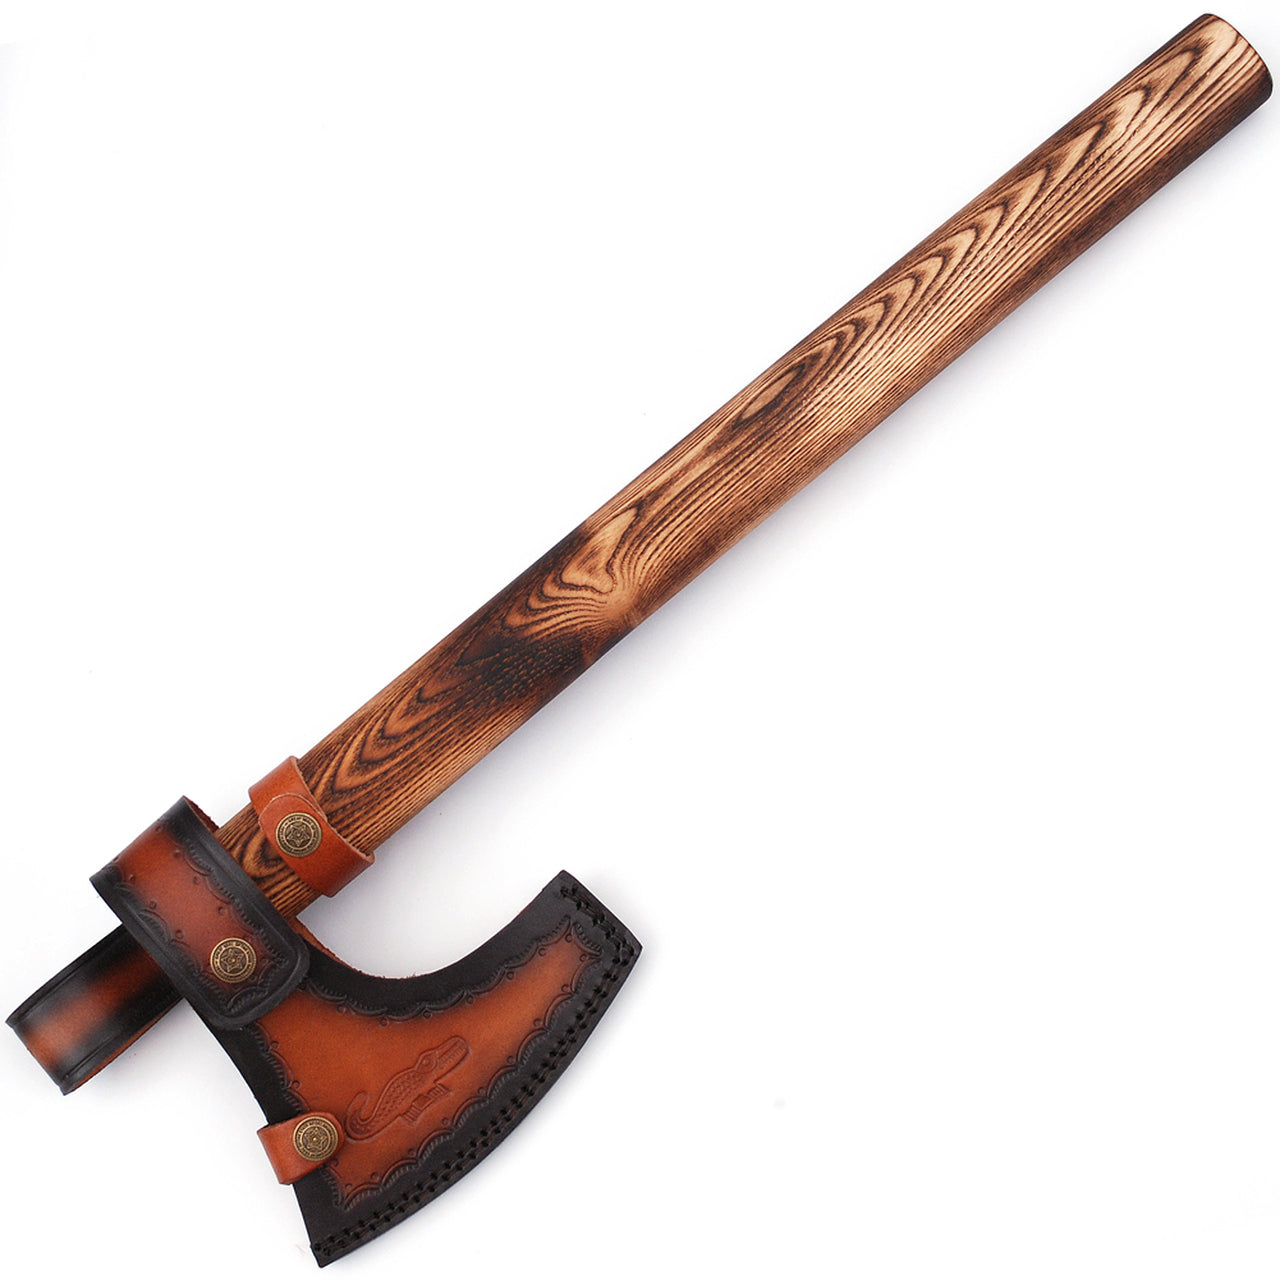 Warhorse High Carbon Forged Steel Bearded Axe-2